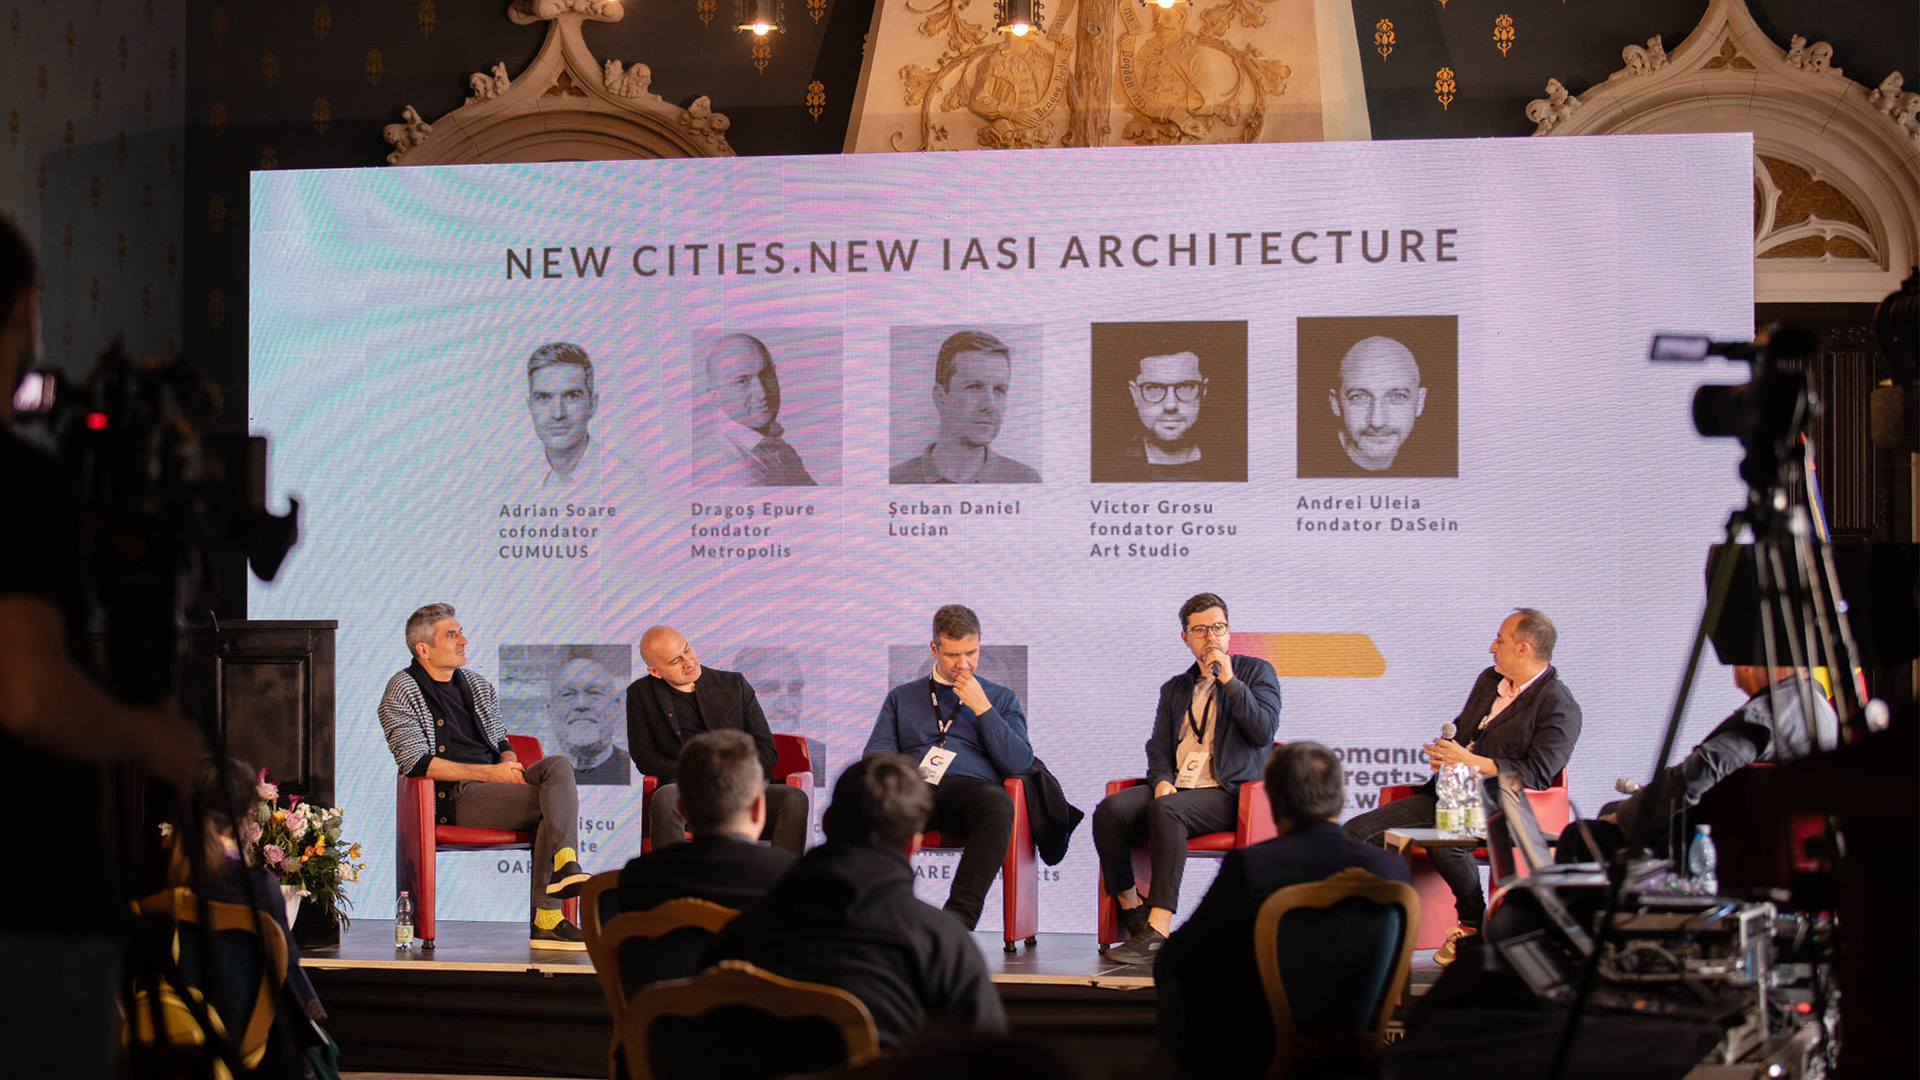 New Cities. New Iasi Architecture image